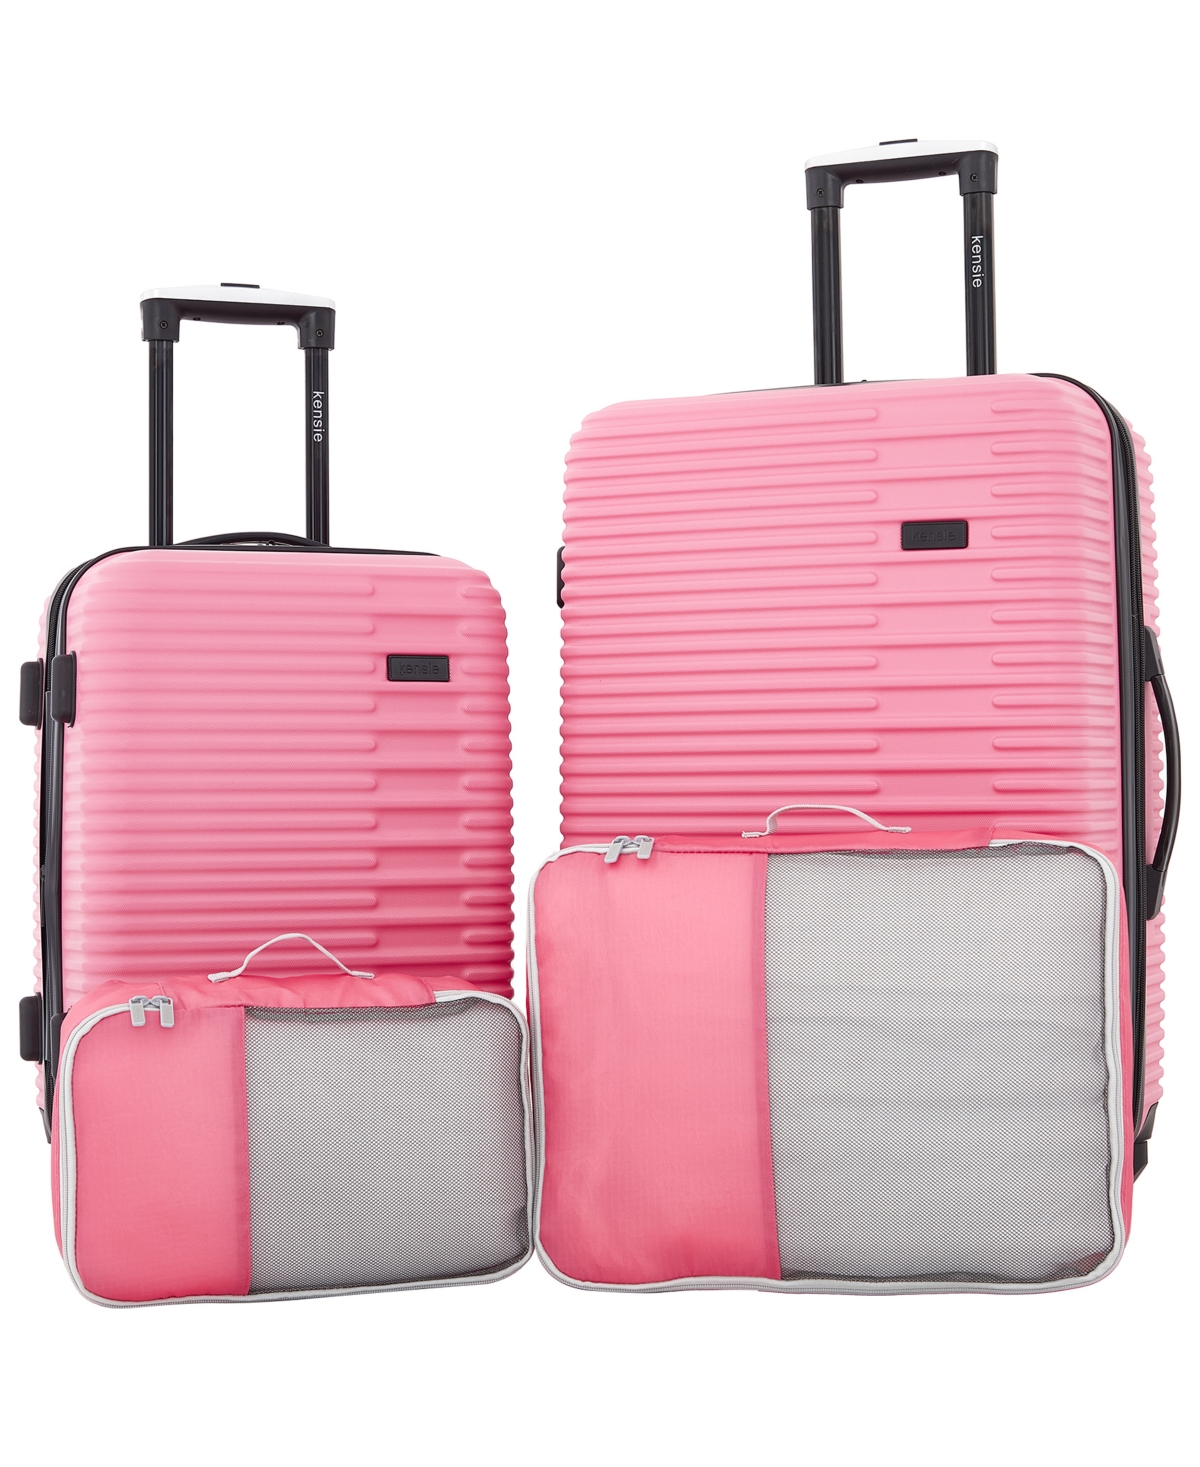 Kensie Hillsboro Expandable Rolling Hardside Collection Set, 4 Piece In Pink